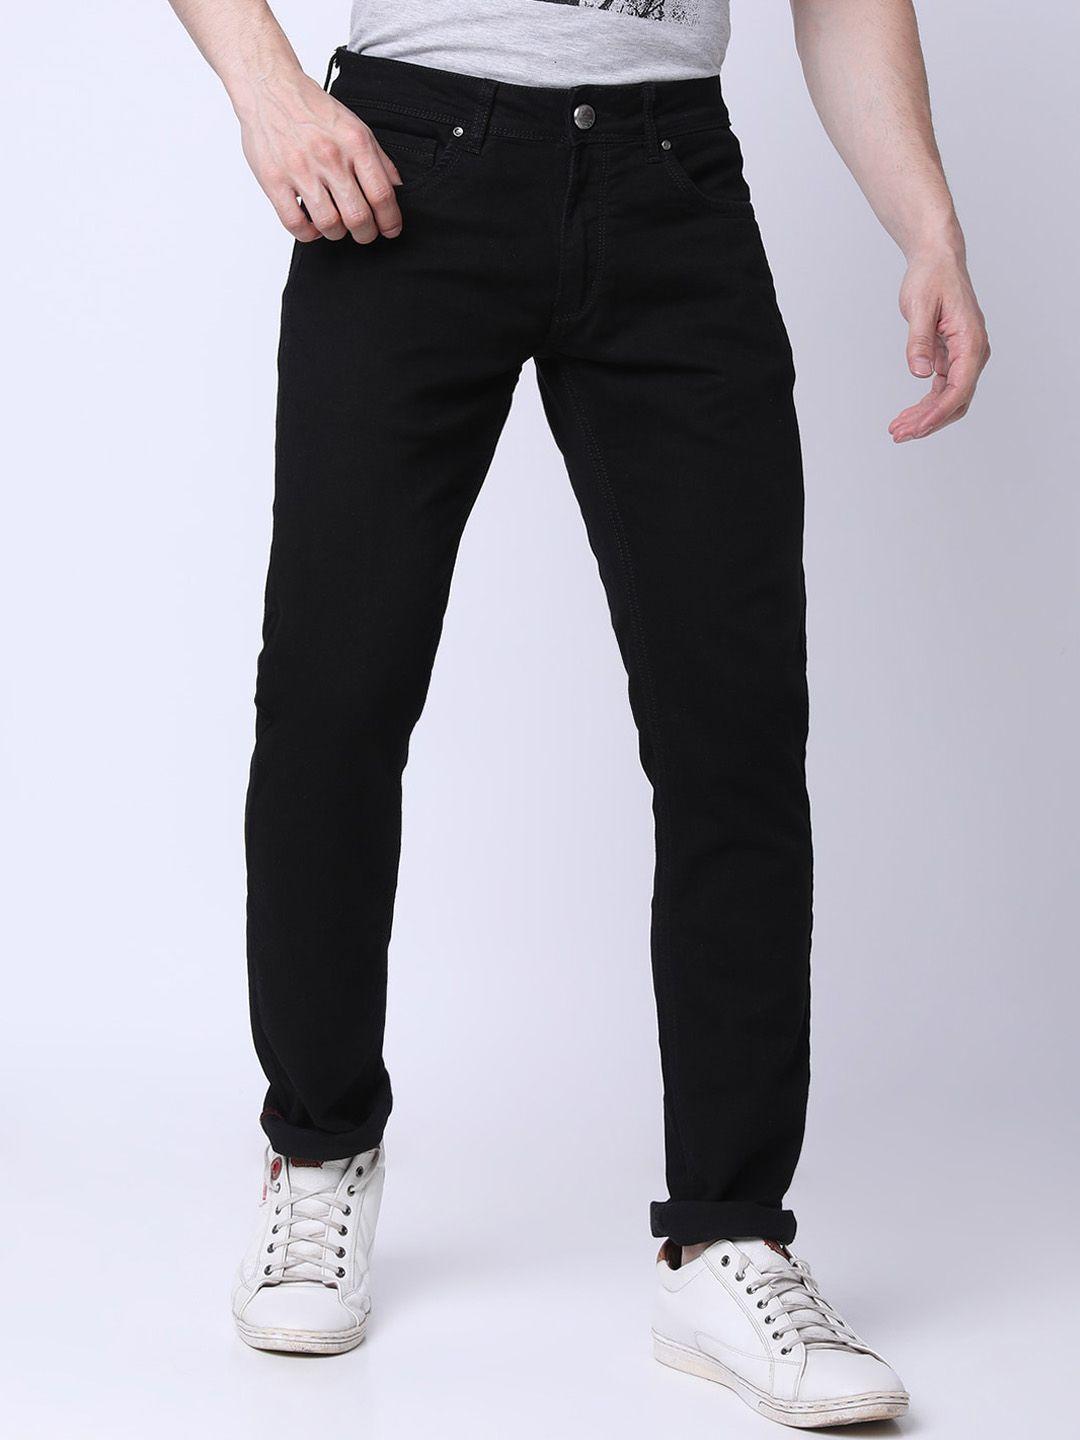 oxemberg-men-mid-rise-clean-look-lean-slim-fit-stretchable-jeans